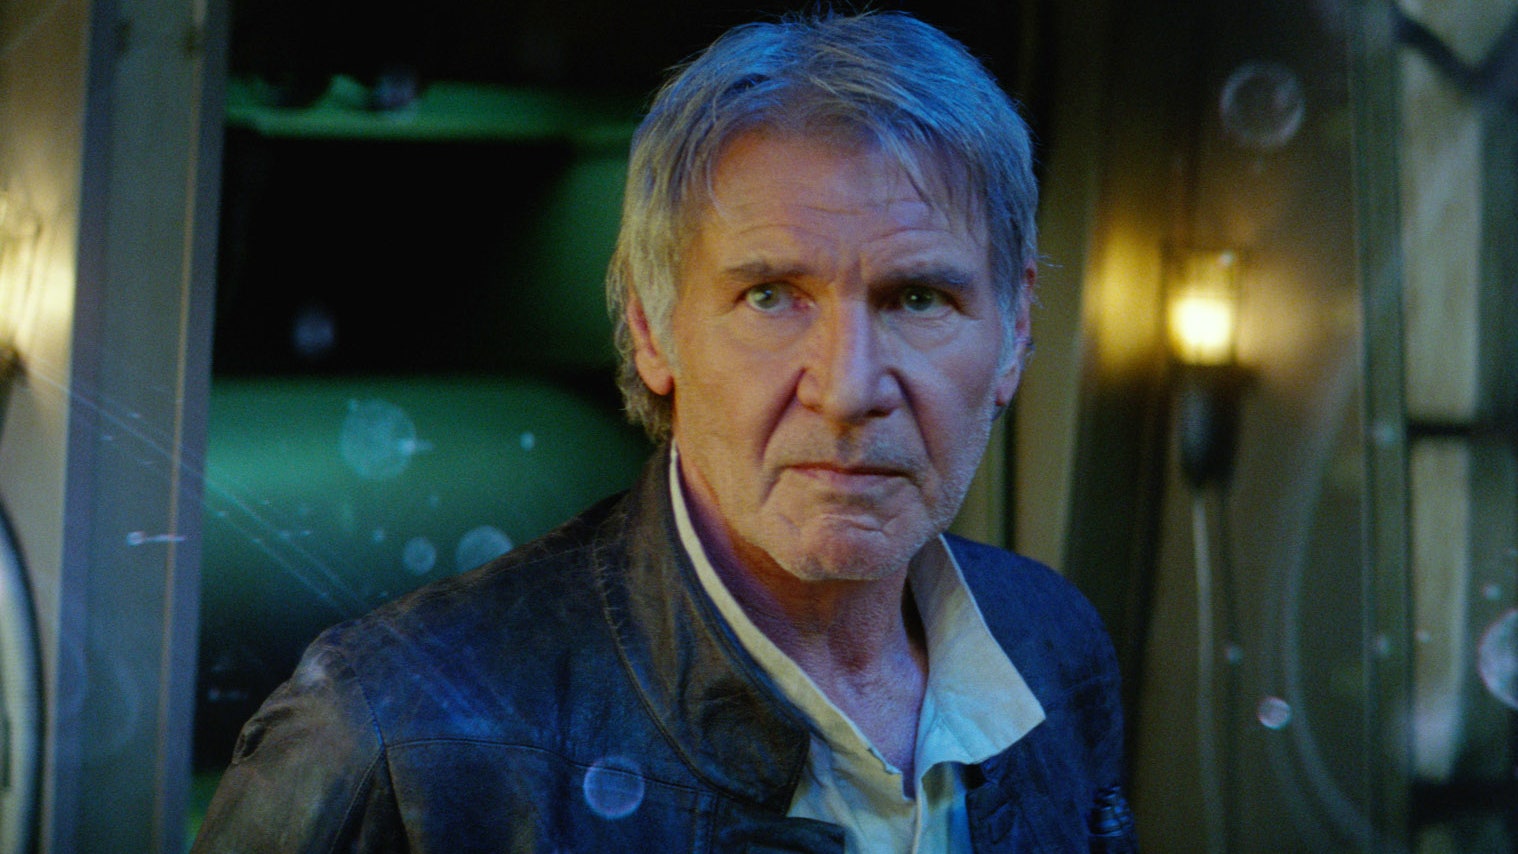 star wars sequels fords return as han solo